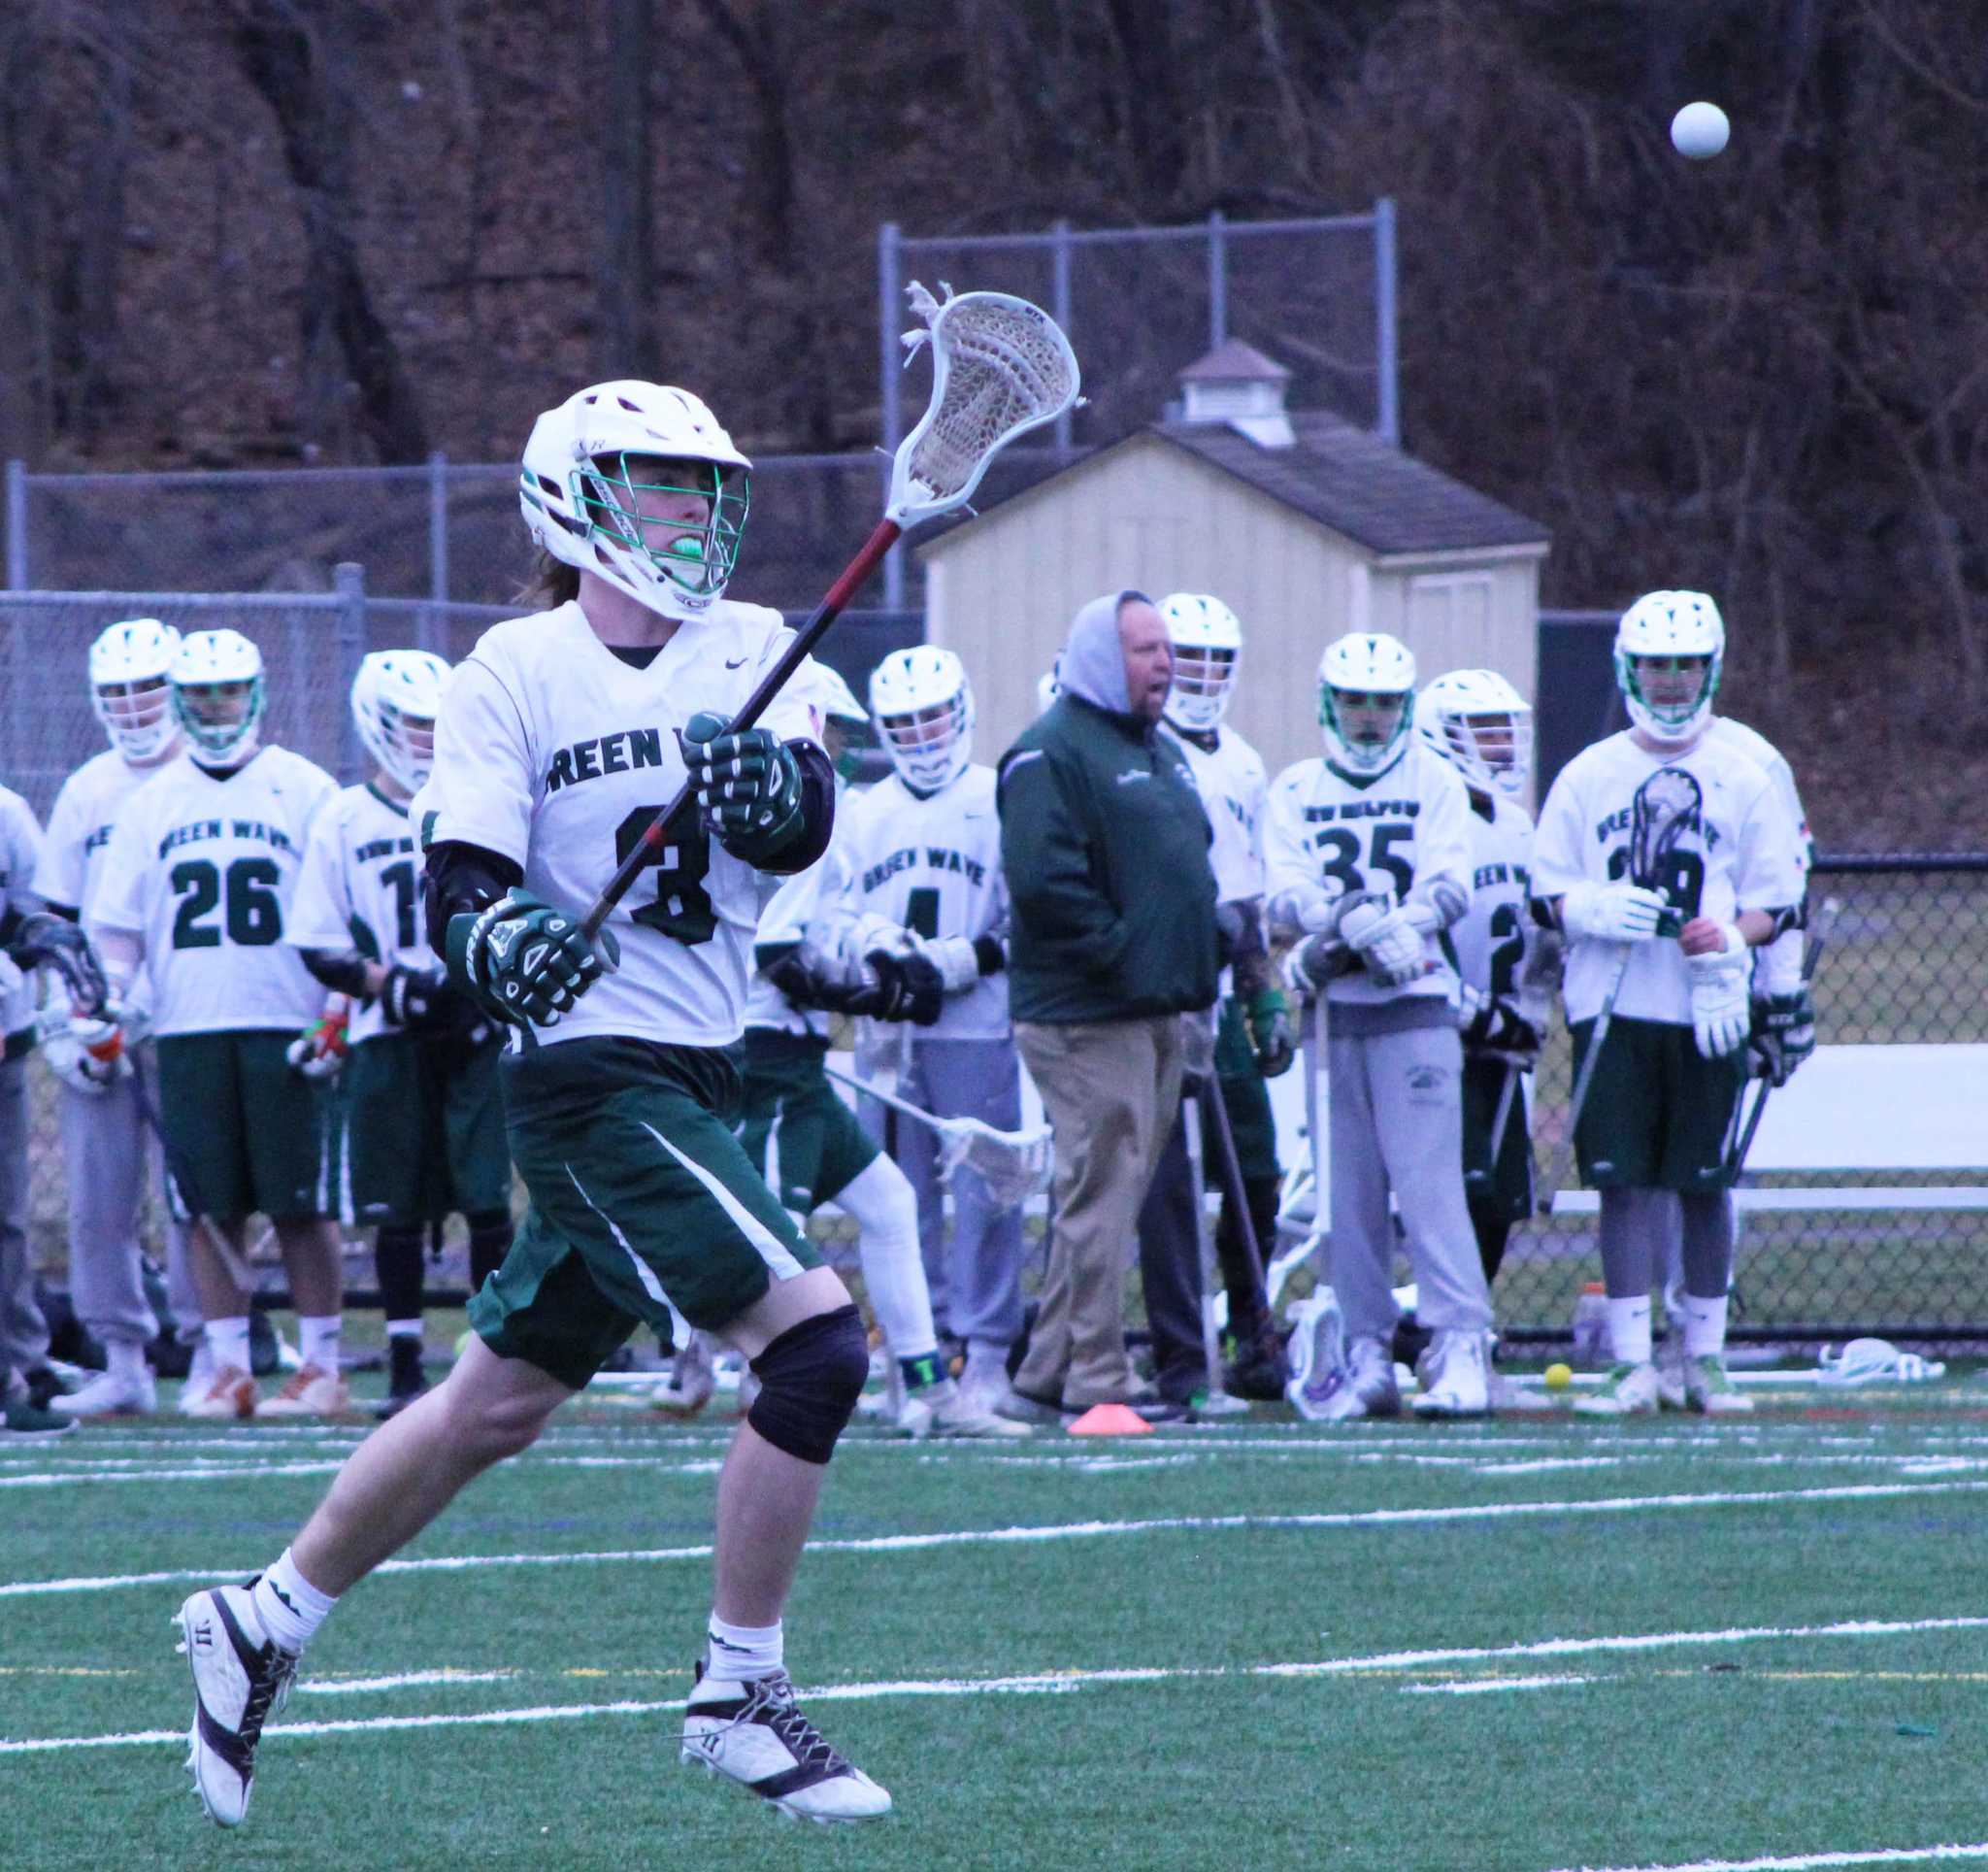 New Milford Youth Lacrosse > Home